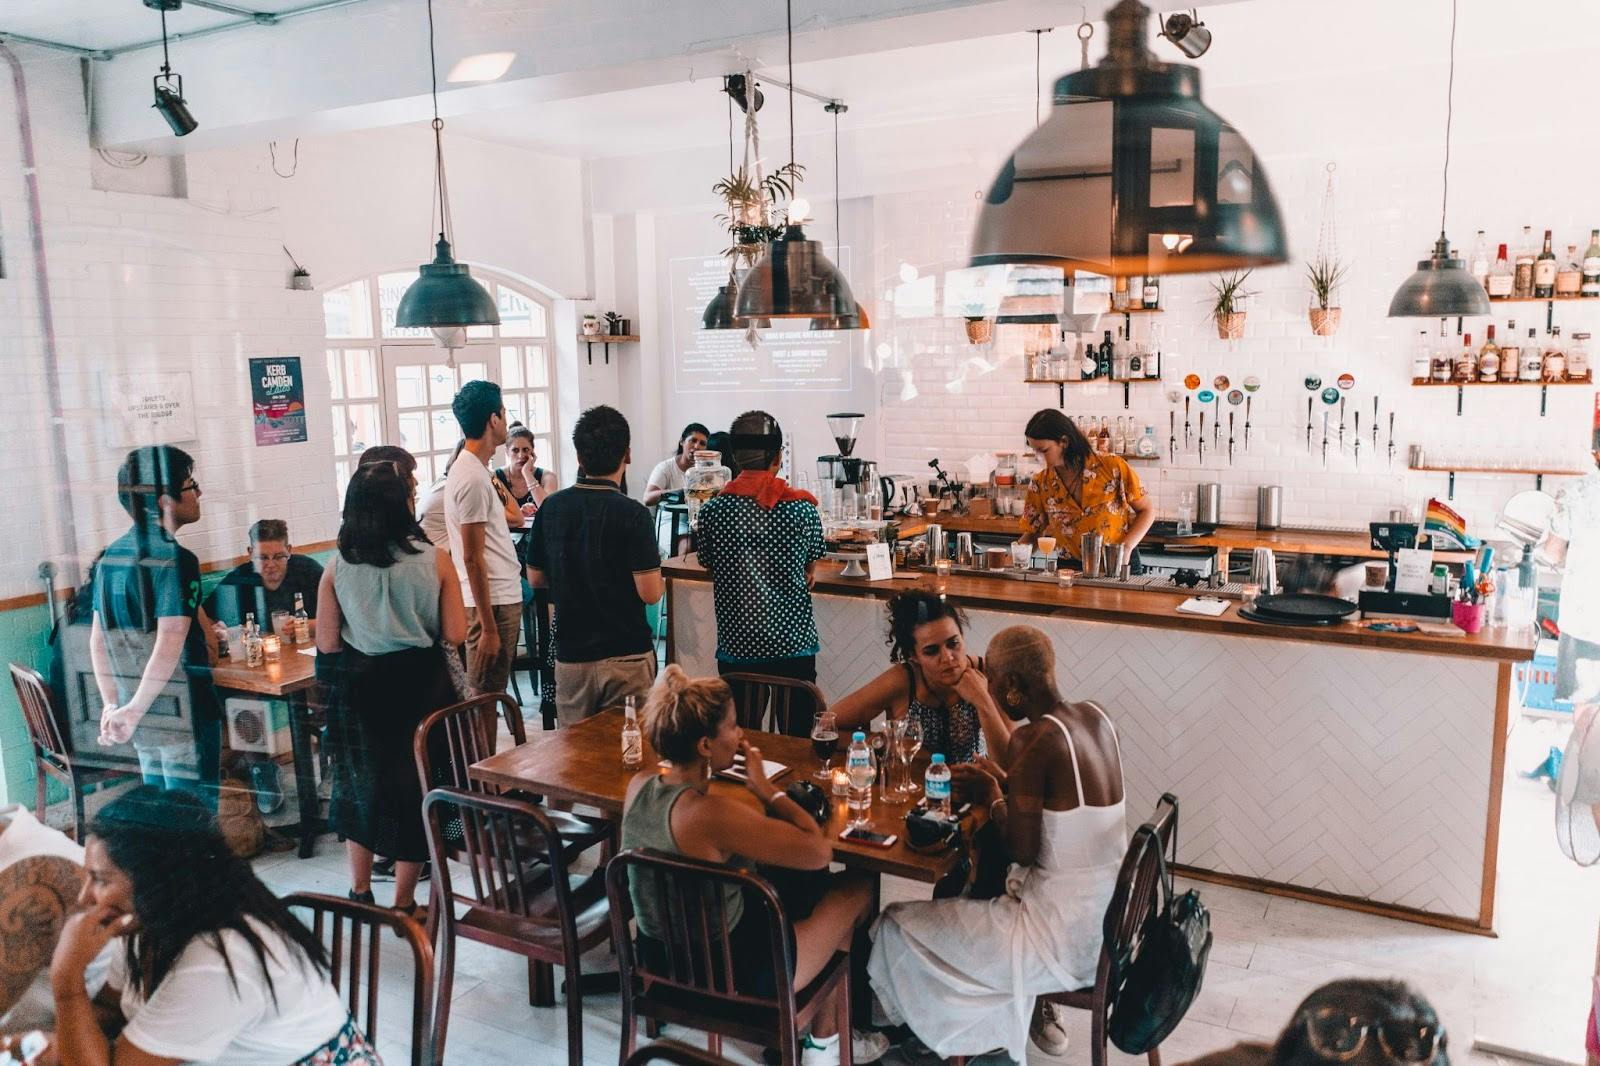 Image of a busy cafe with customers queuing to order at the counter